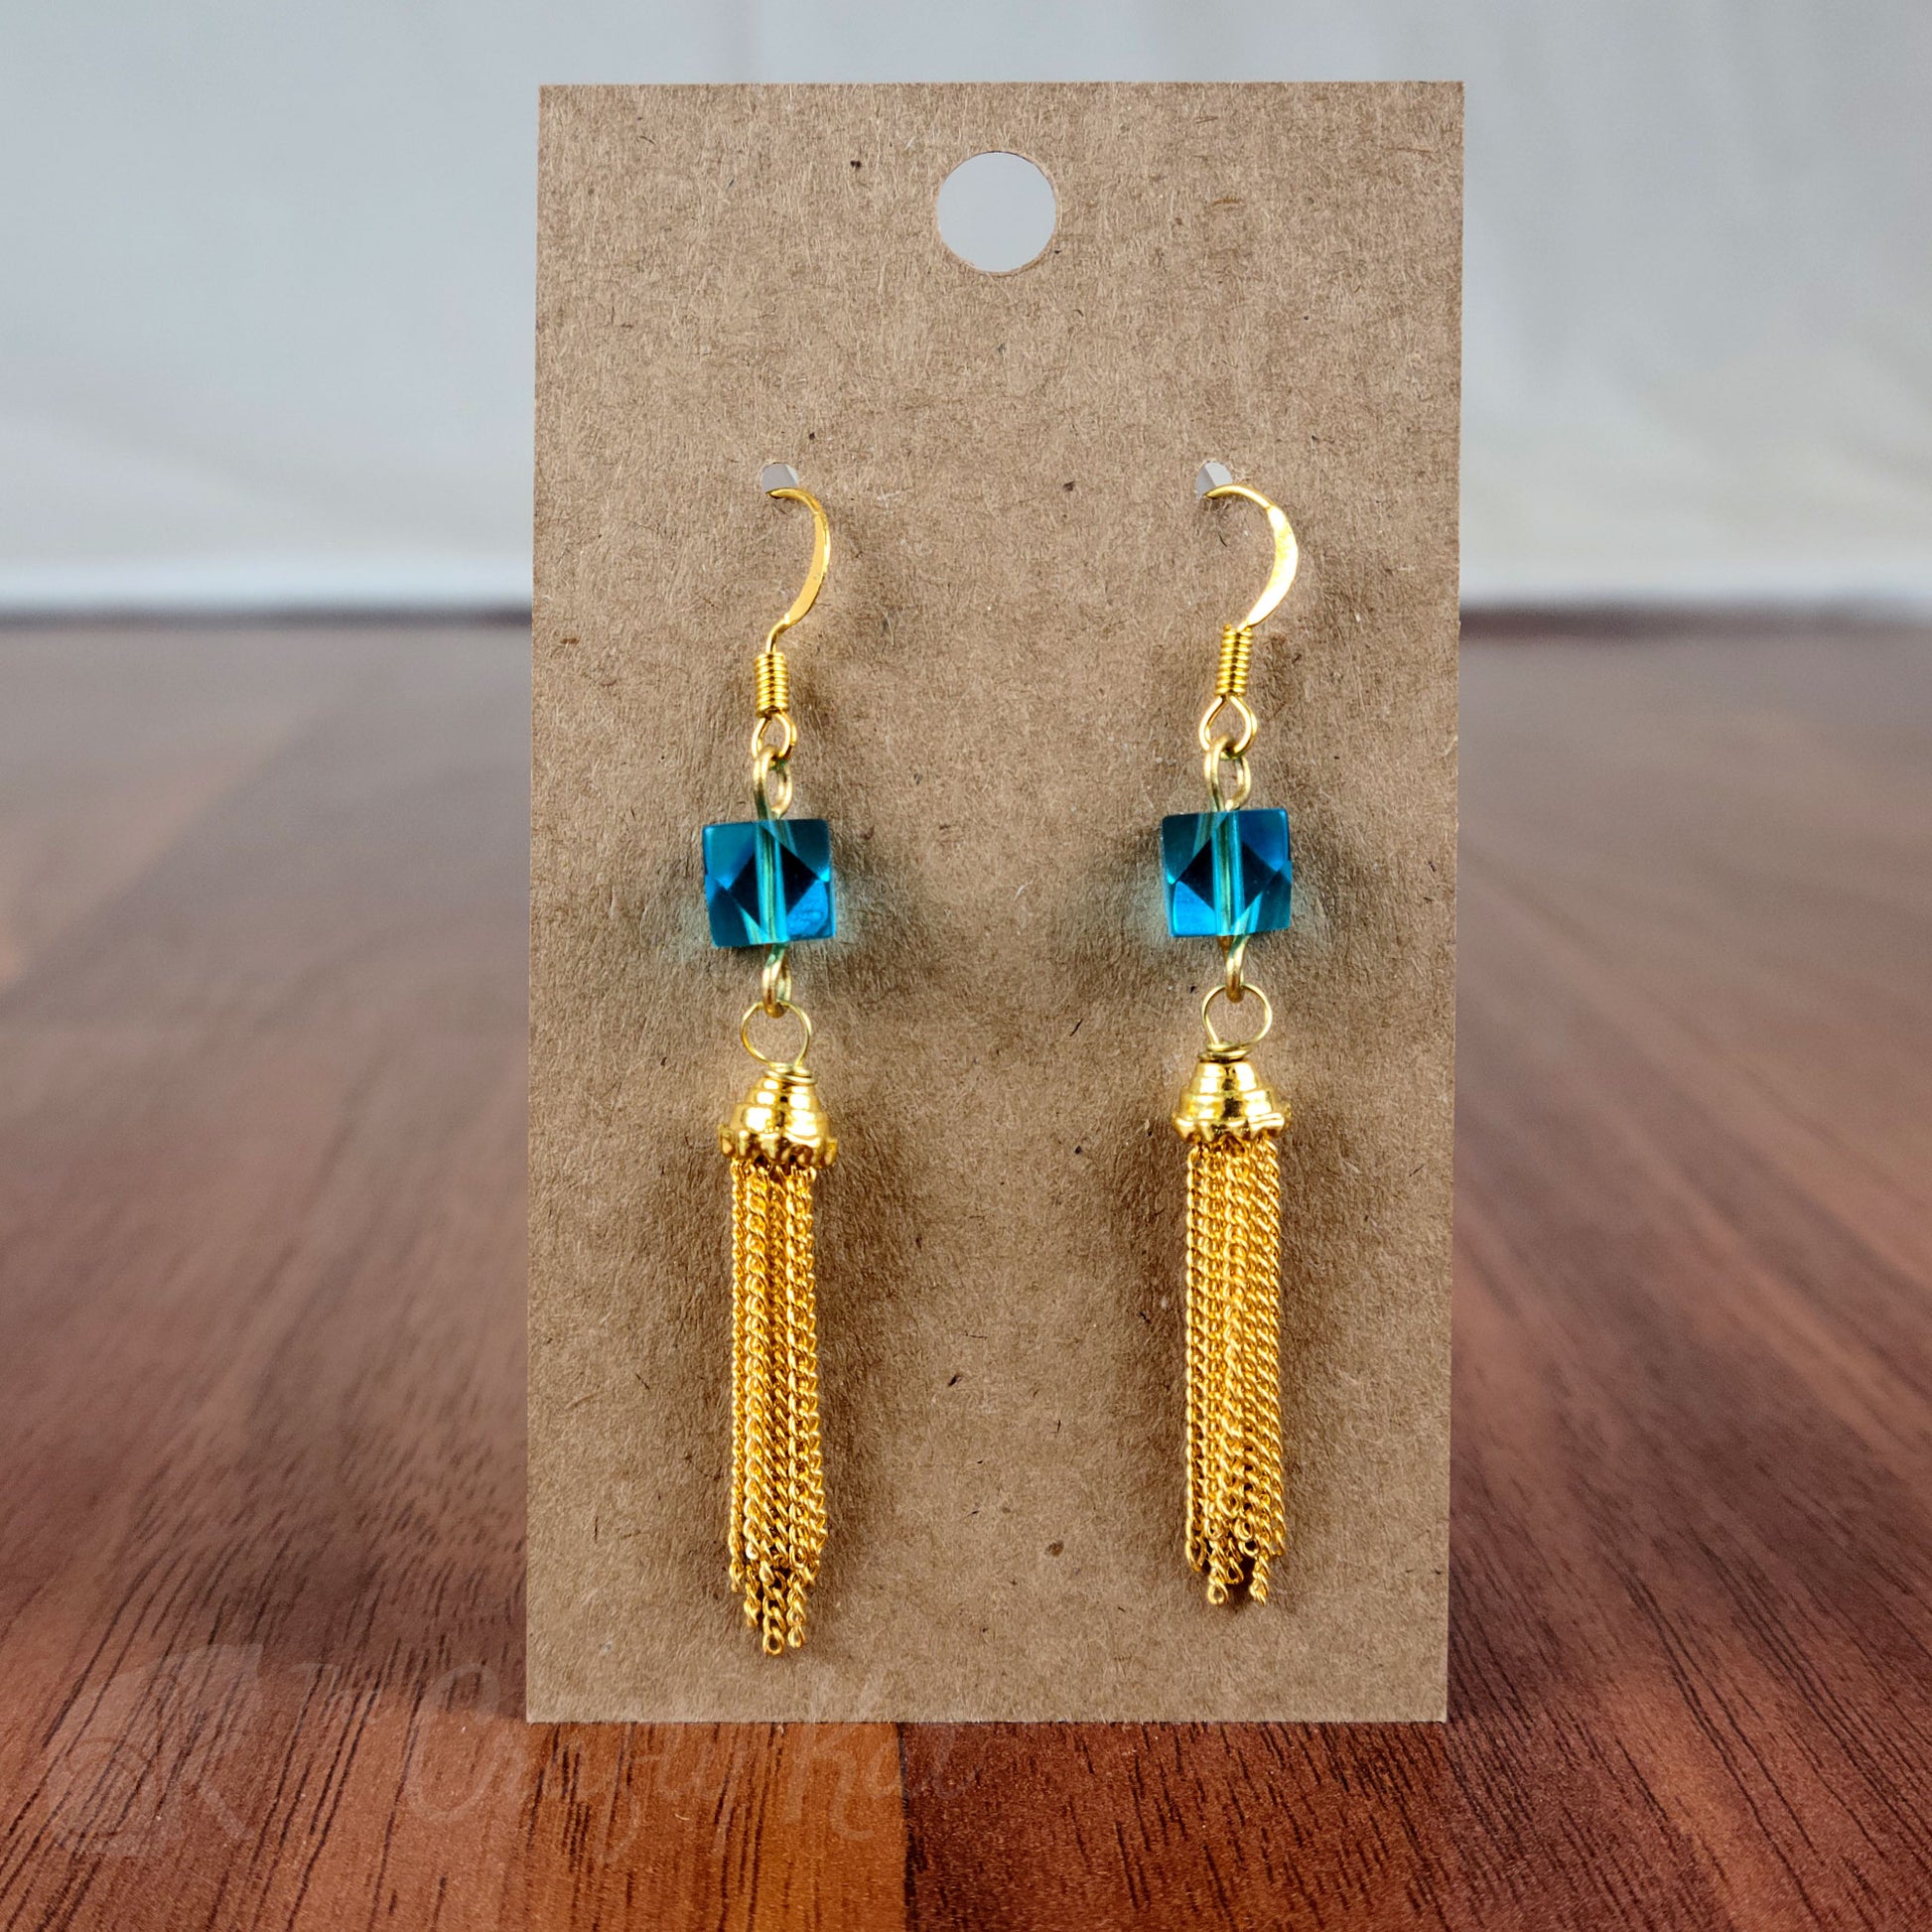 Drop earring featuring a cyan angle-cut cube crystal bead and gold chain tassle and fittings